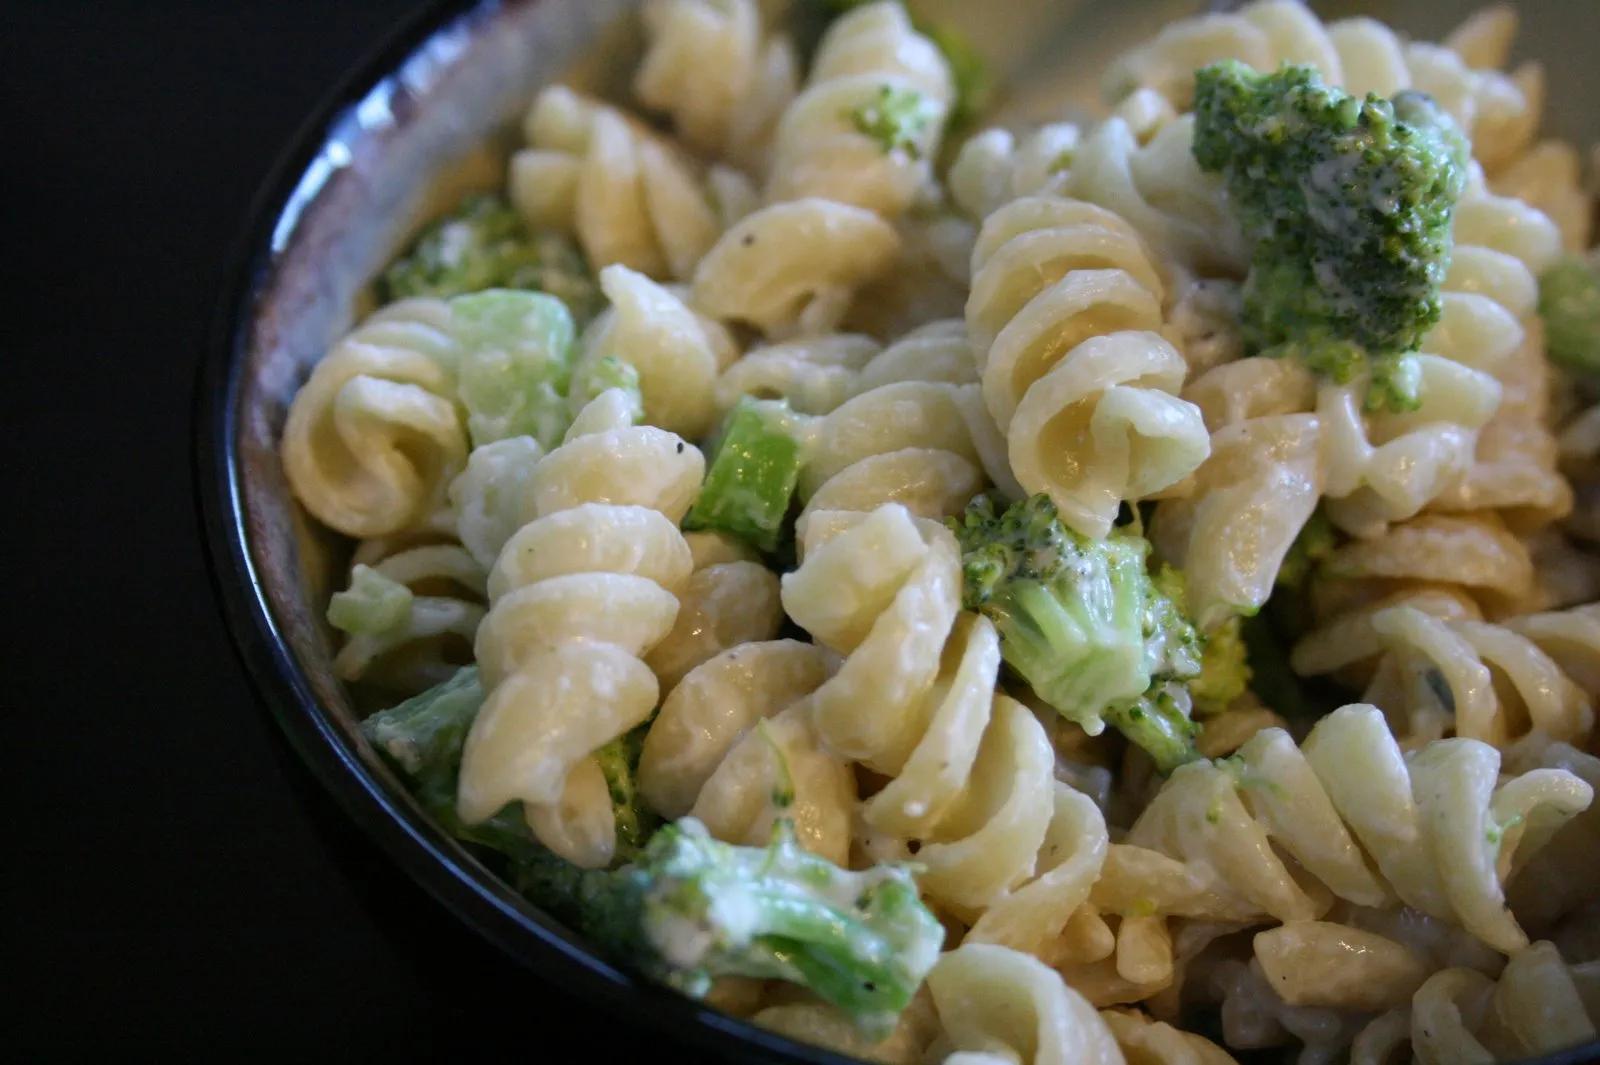 The Chow Review: Pasta and Broccoli with Gorgonzola Cream Sauce